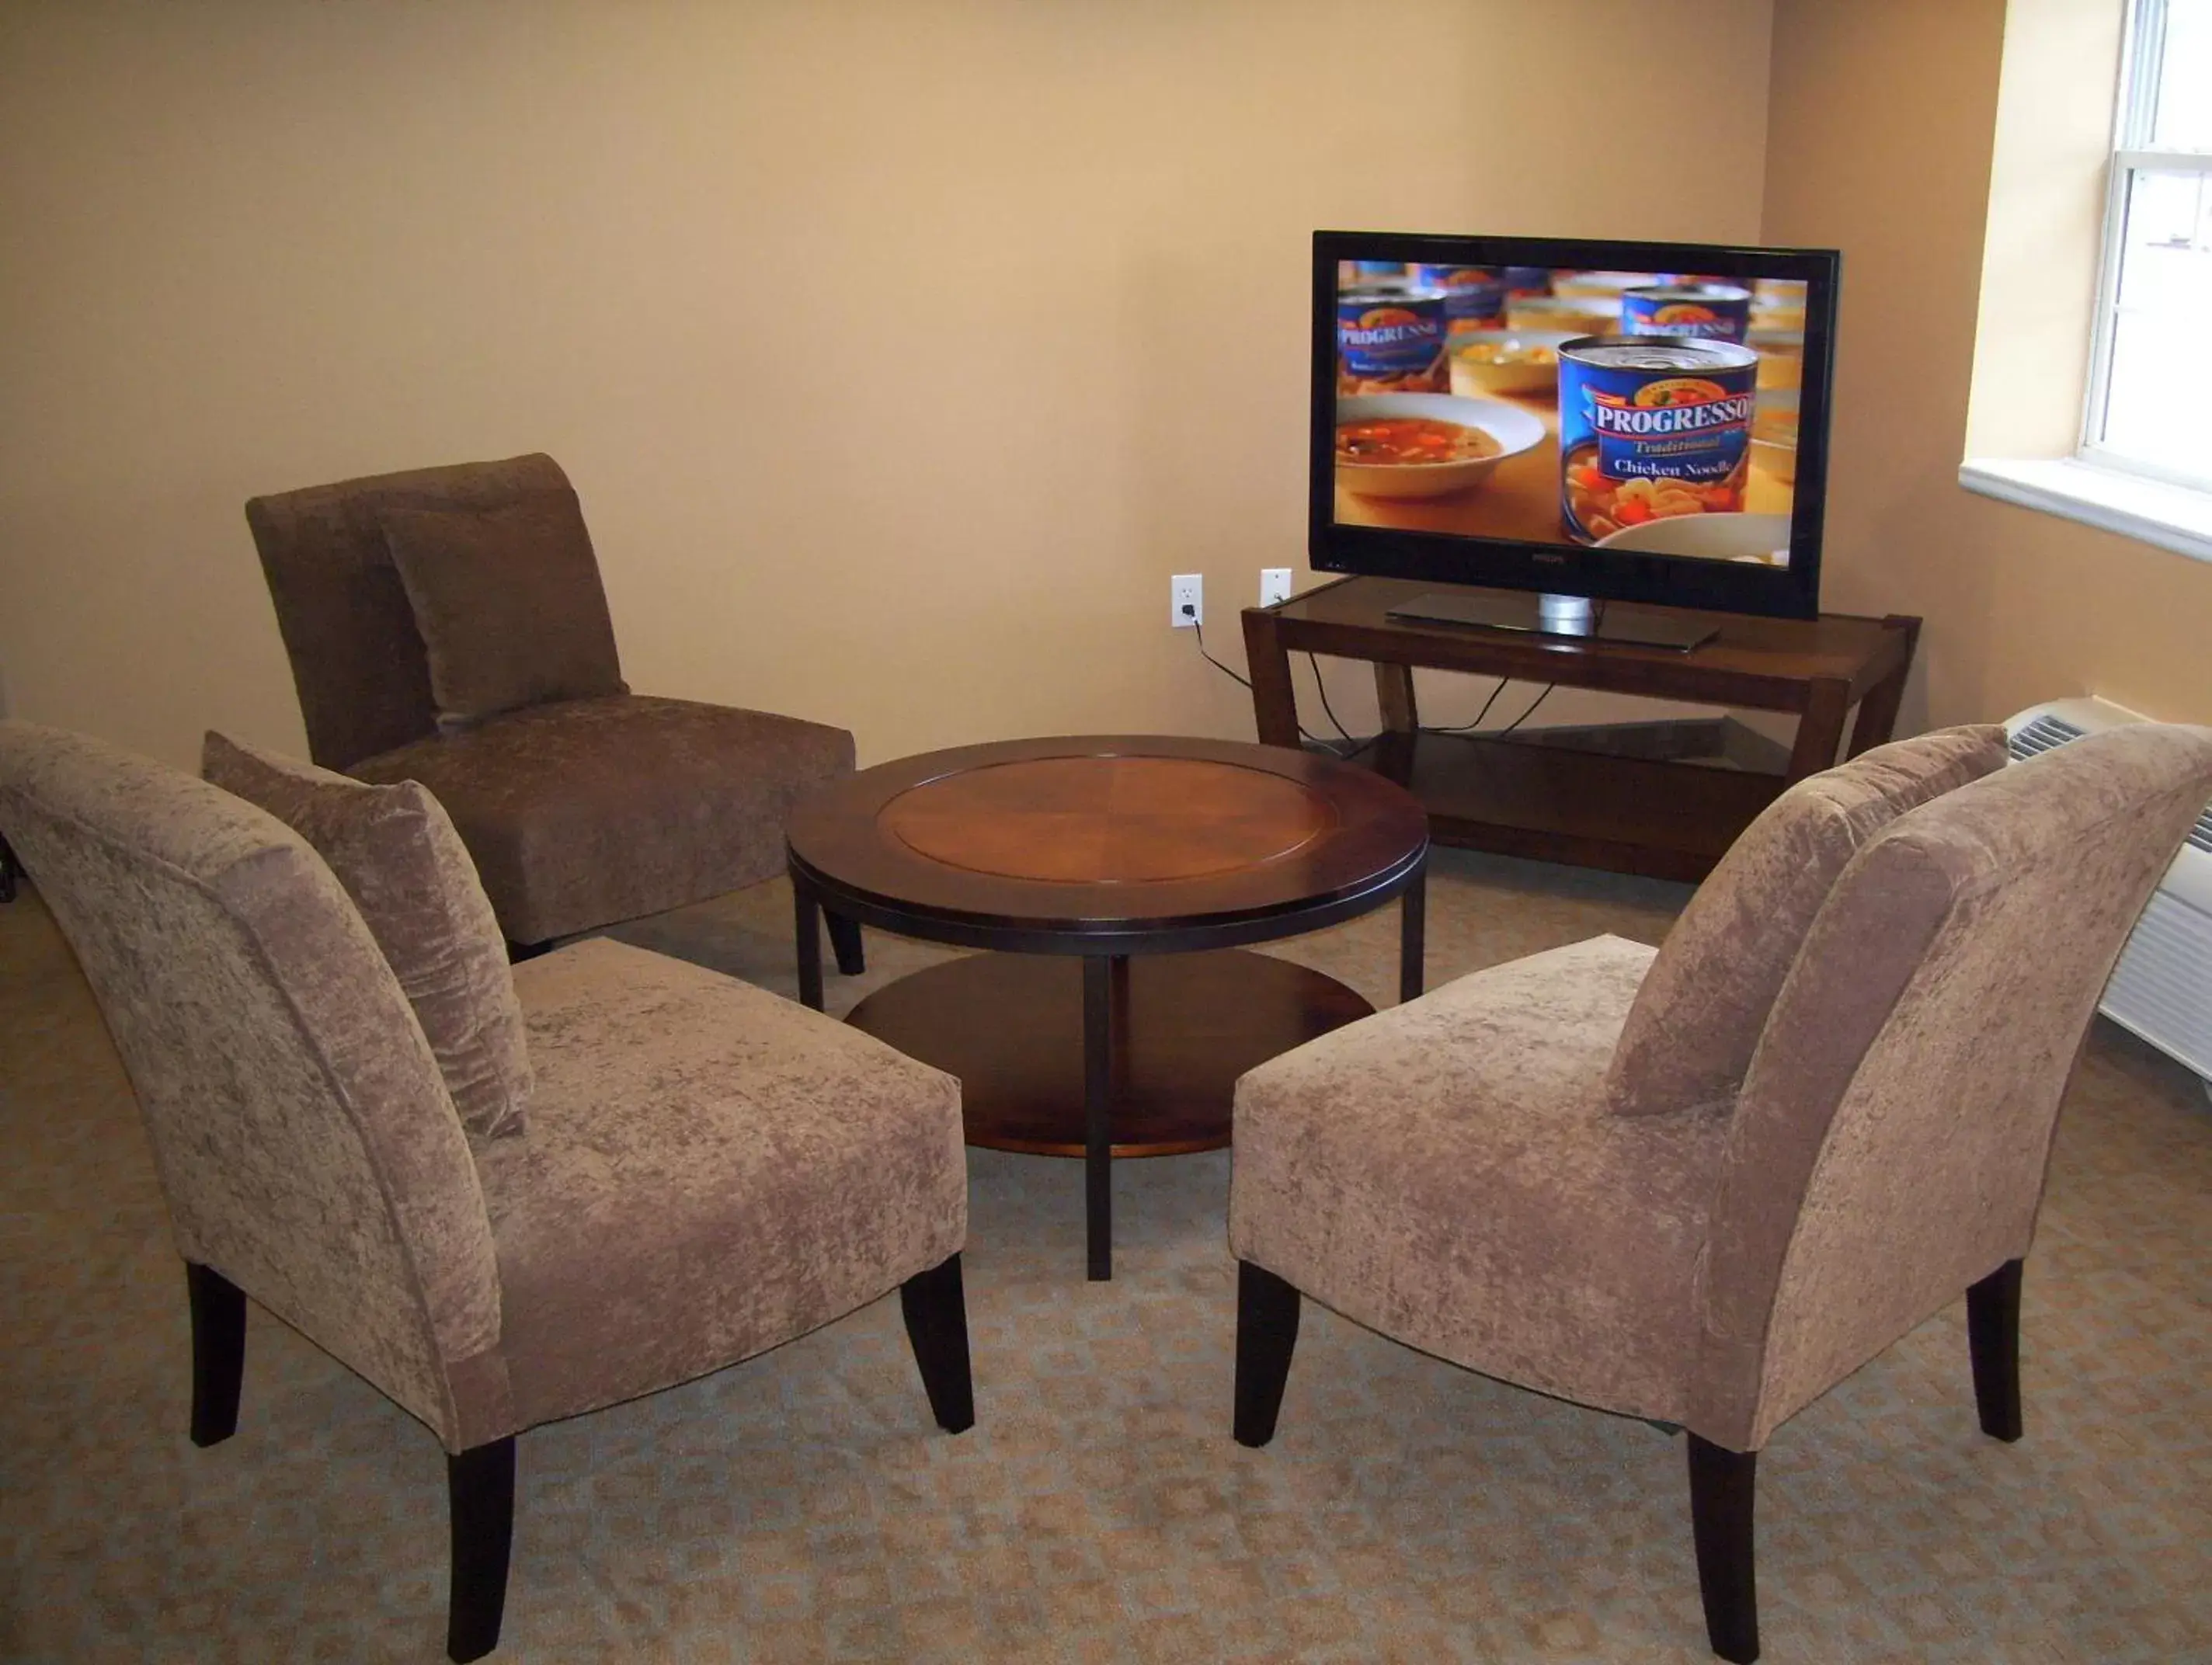 Property building, Lounge/Bar in Microtel Inn & Suites Quincy by Wyndham